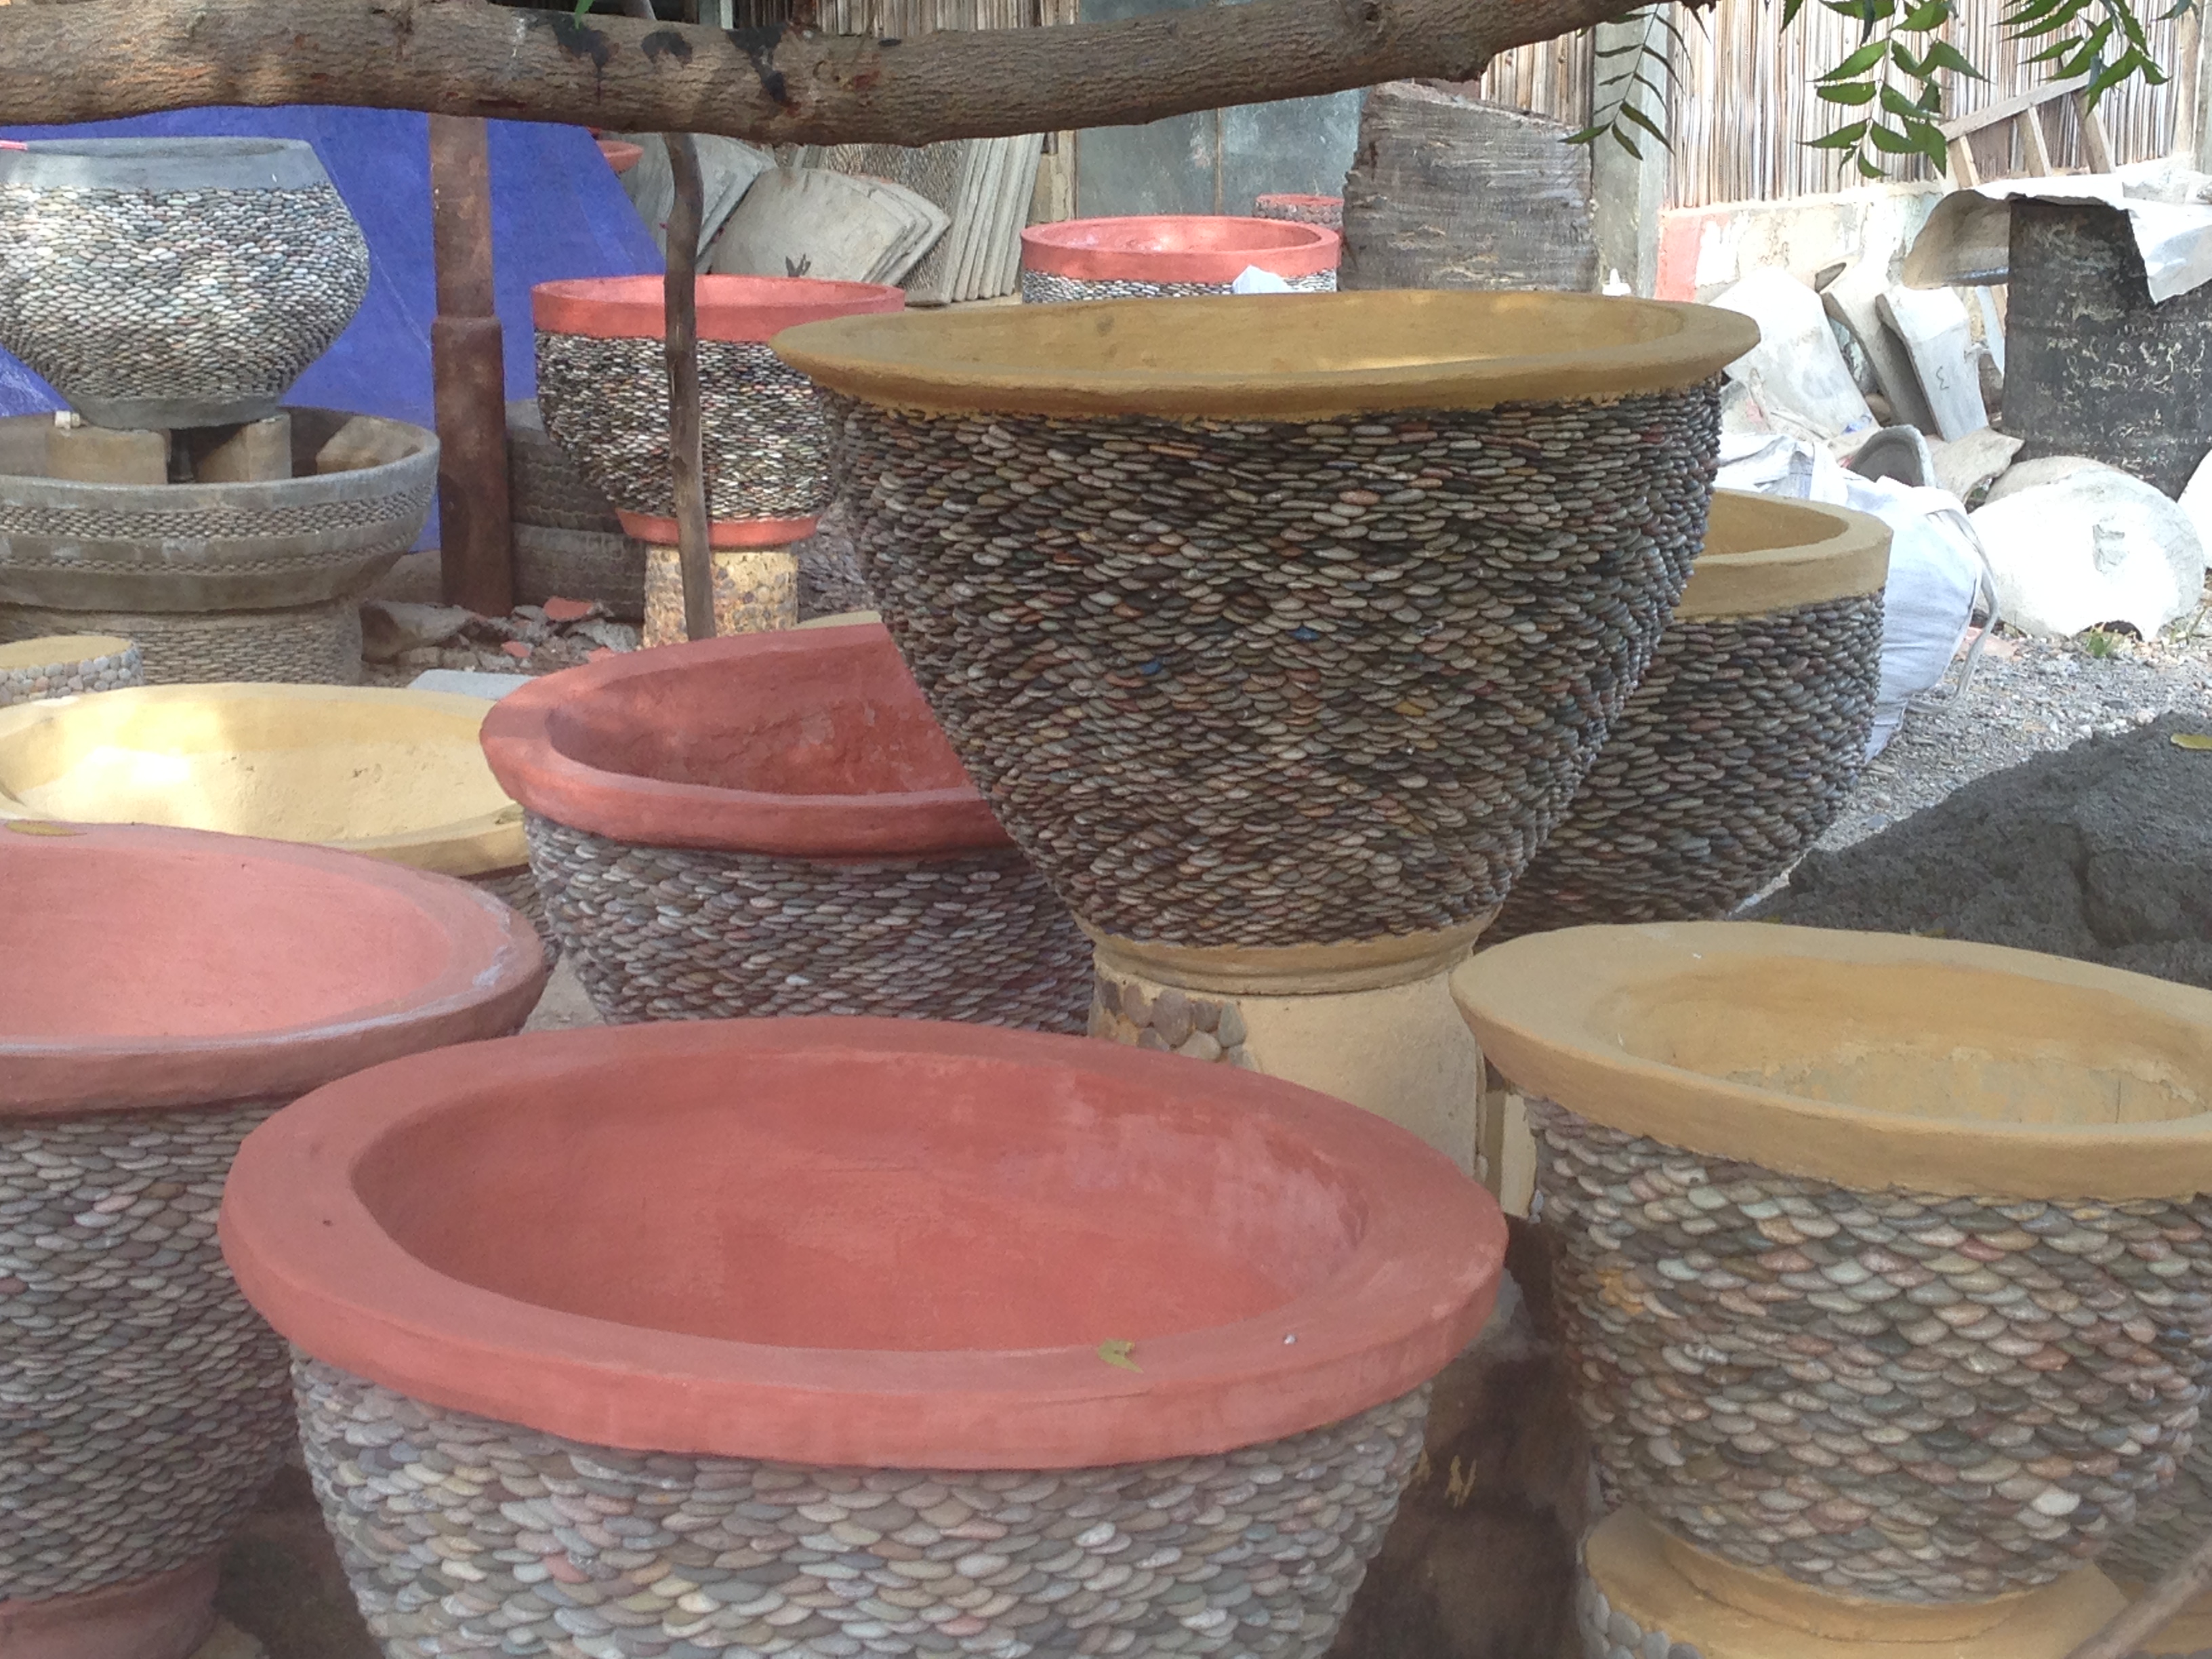 These cement and pebble pots support Jose and his extended family. Pebbles a plenty in Timor Leste.